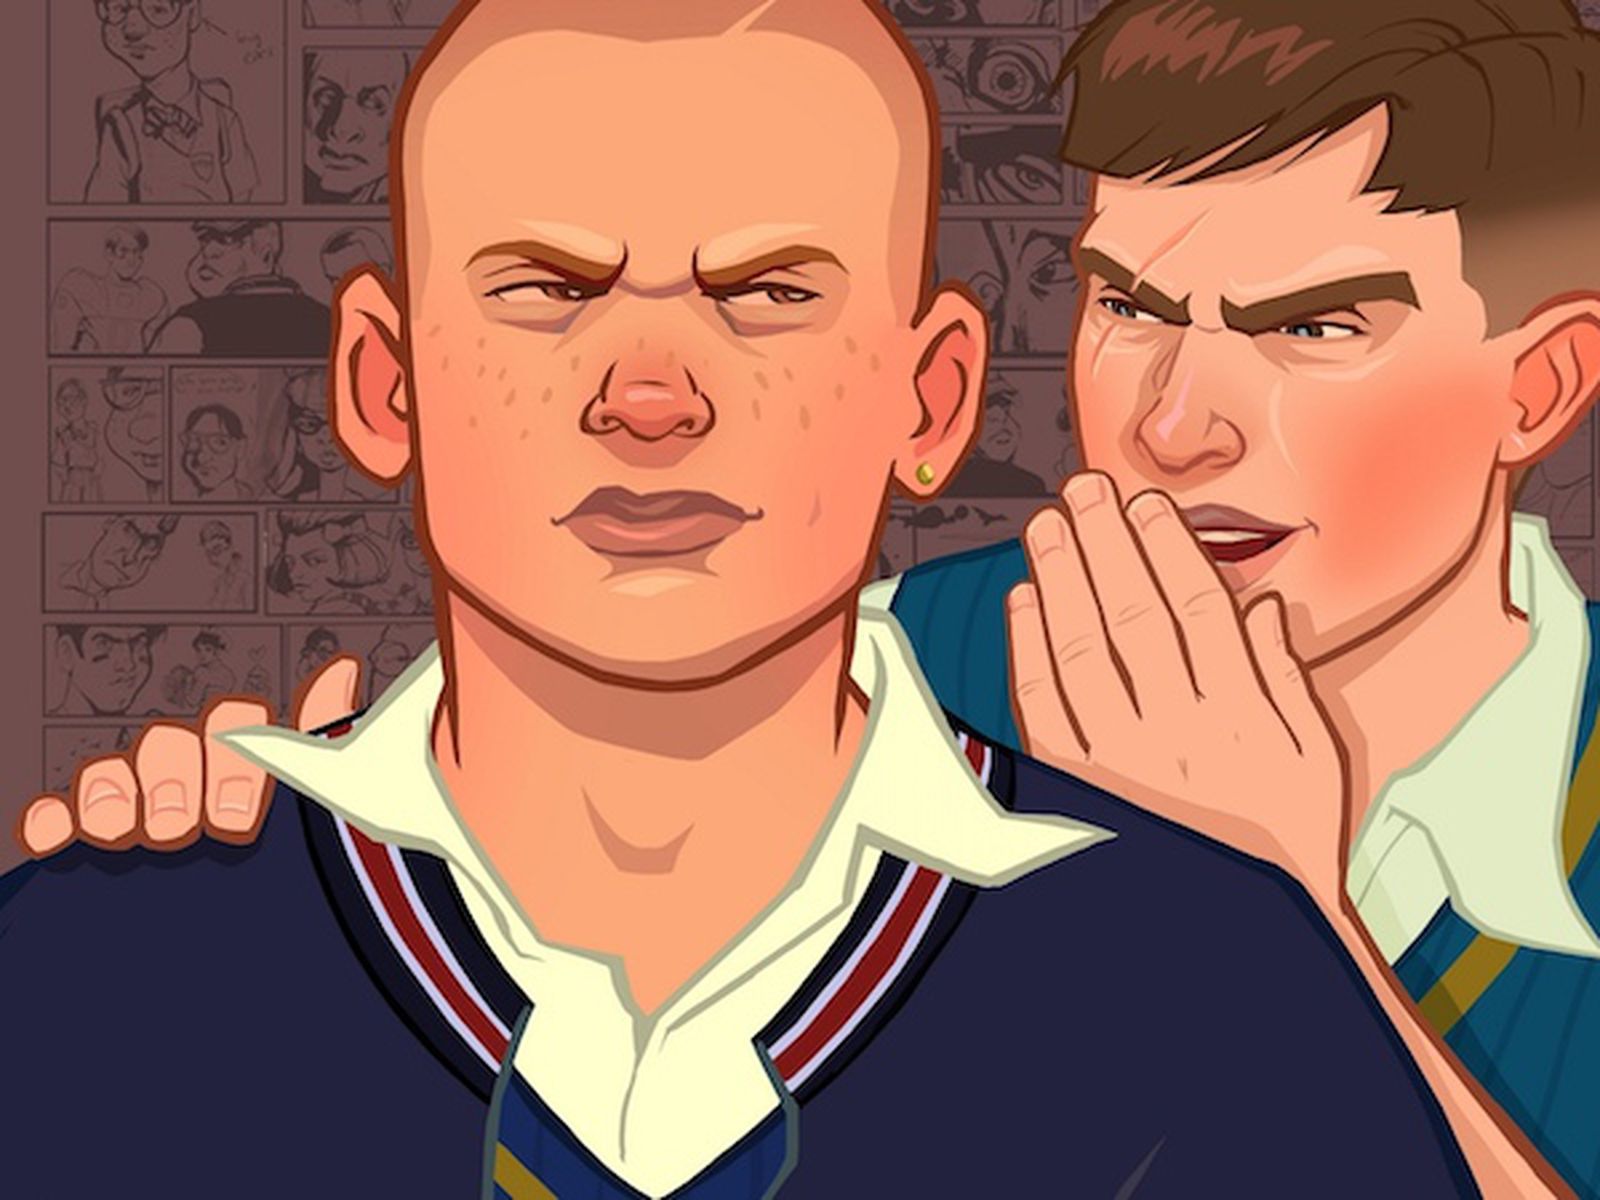 Bully Anniversary Edition Mobile - Download & Play for Android & iOS